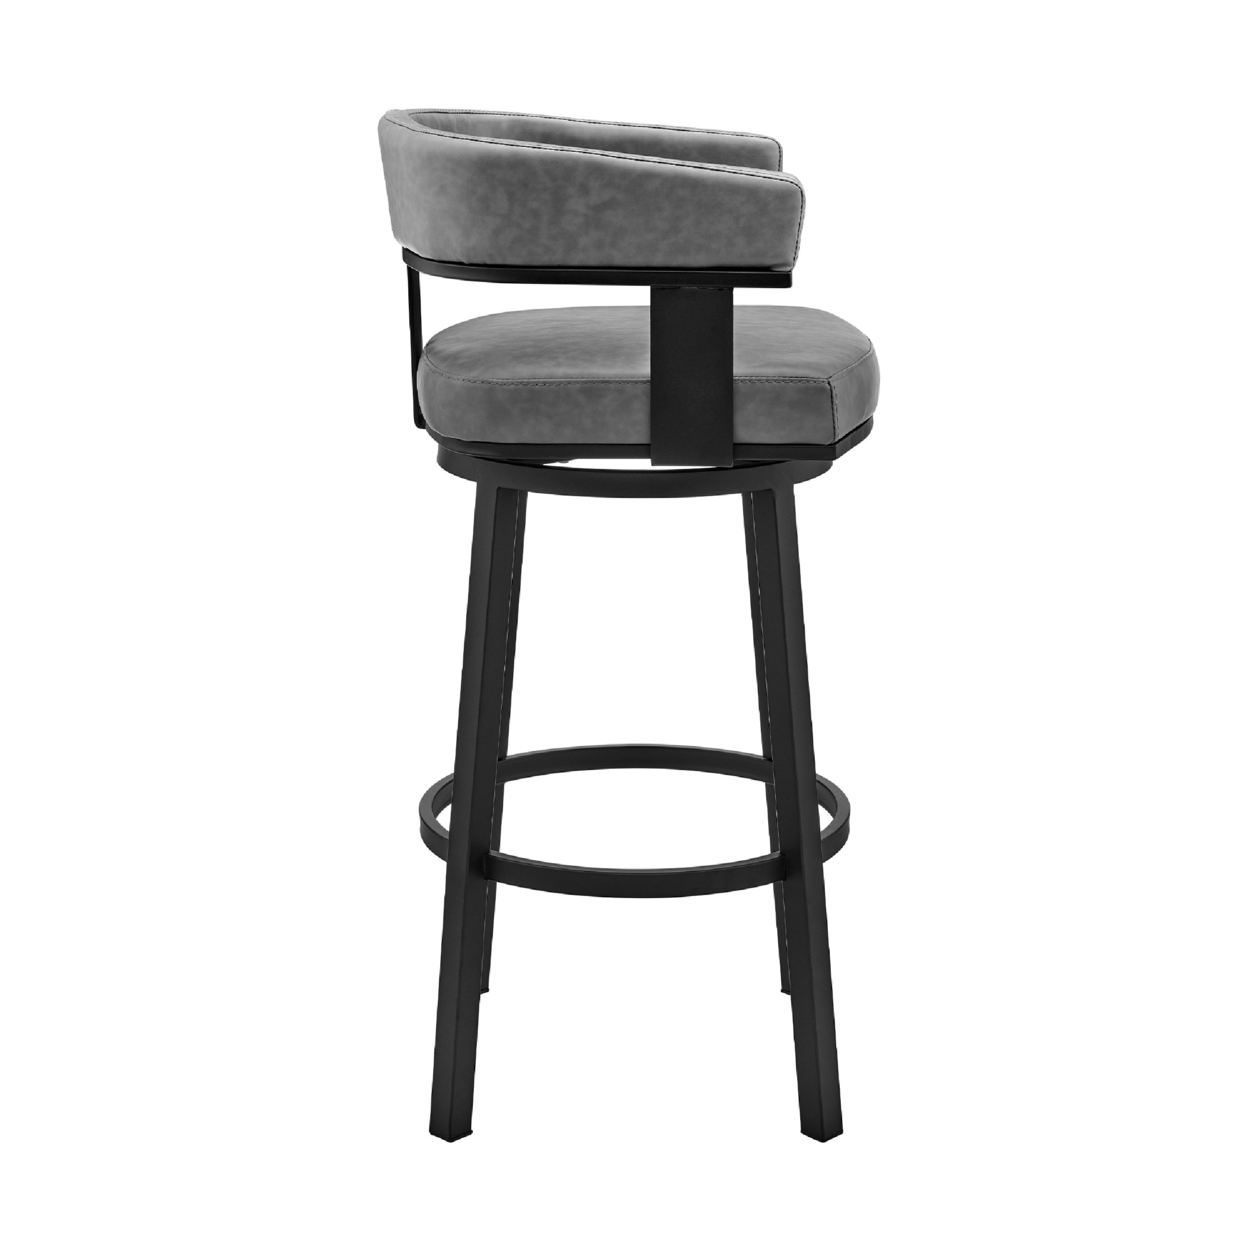 Swivel Barstool With Curved Open Back And Metal Legs, Black And Gray- Saltoro Sherpi